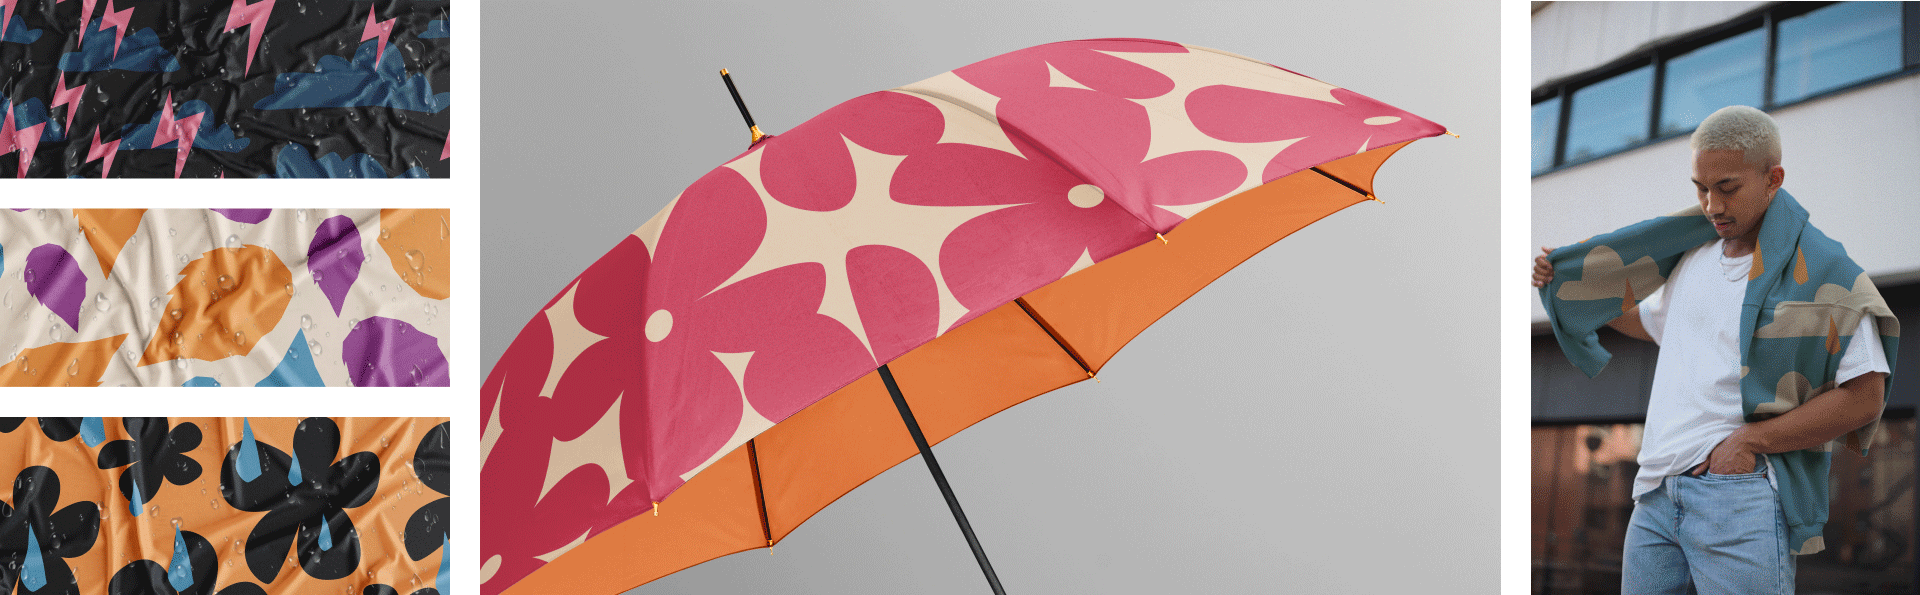 A set of 4 images and one gif, the first 3 feature 3 different abstract patterns with an overlay of water droplets, the second is a graphic flower pink umbrella with orange on the inside, and the gif that features an abstract patterned hoodie on two different men.